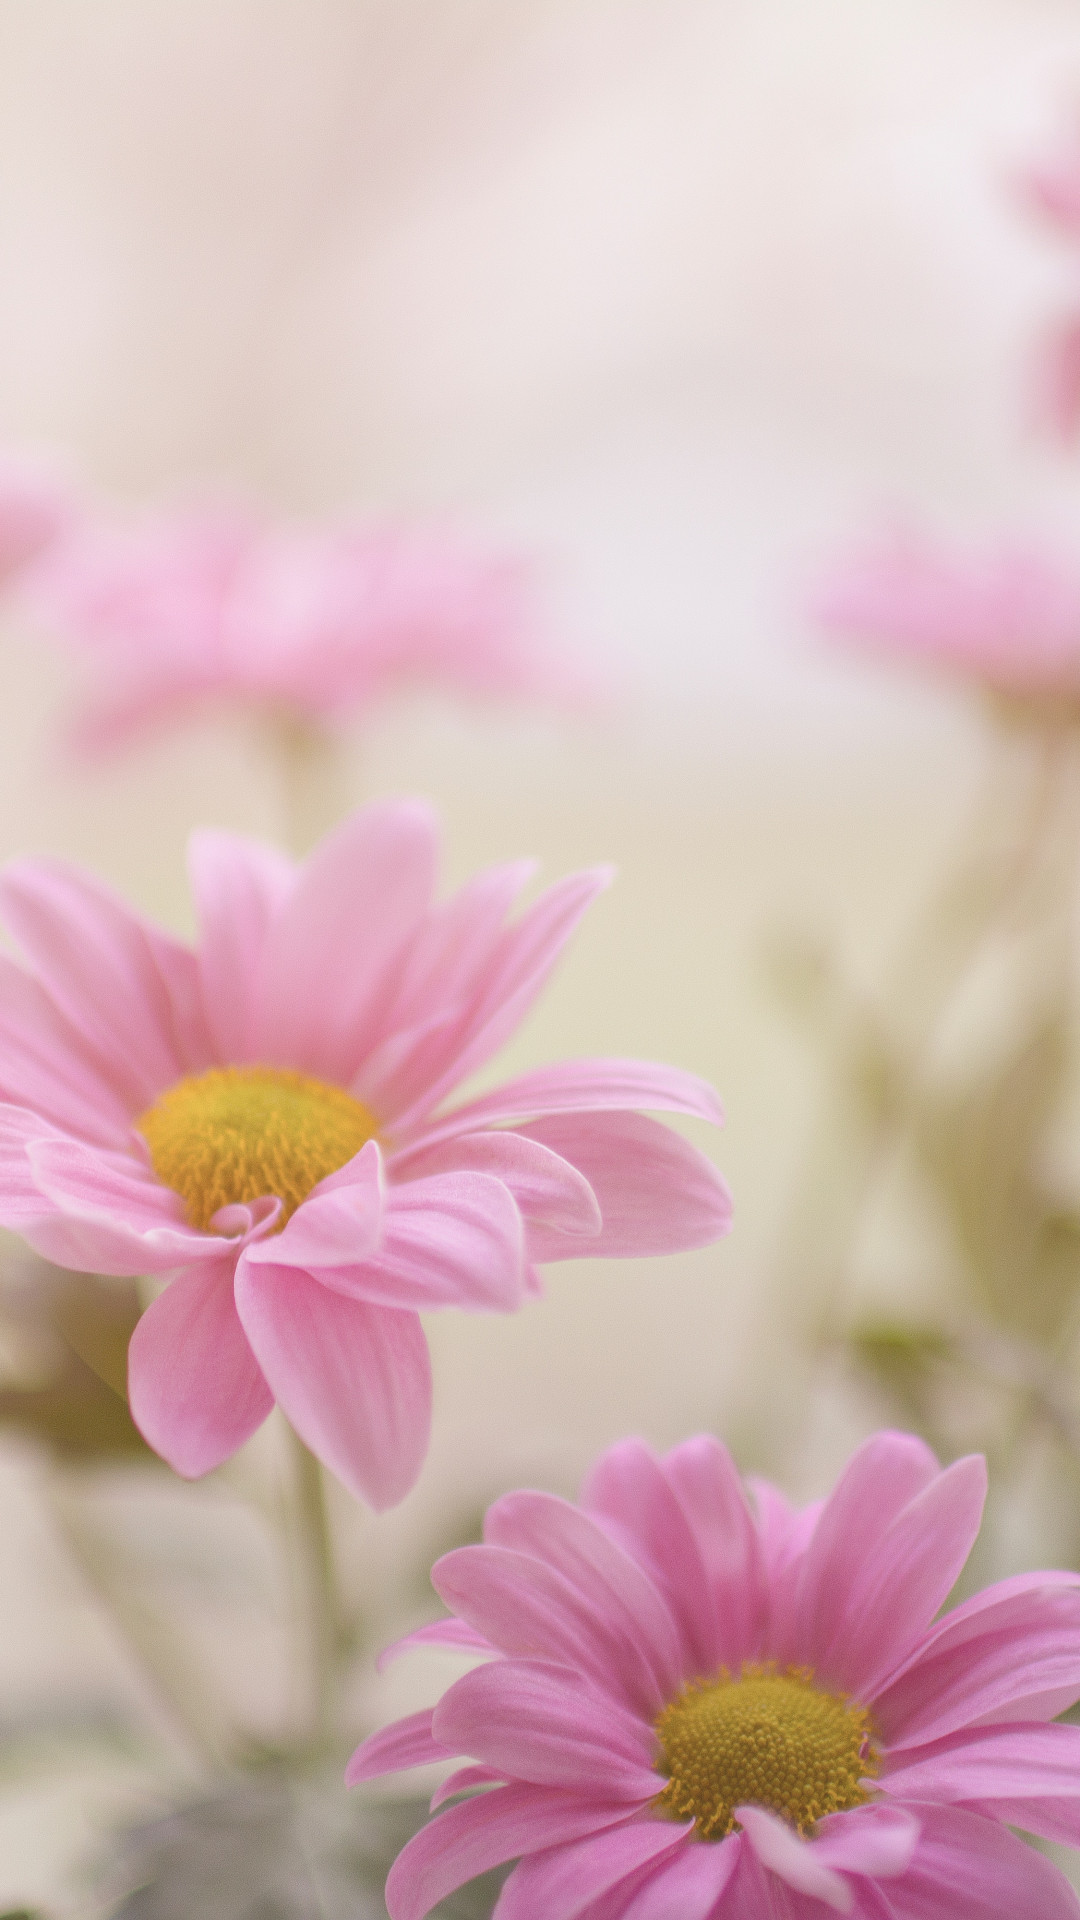 1080x1920 Pink And Daisy iPhone Wallpaper